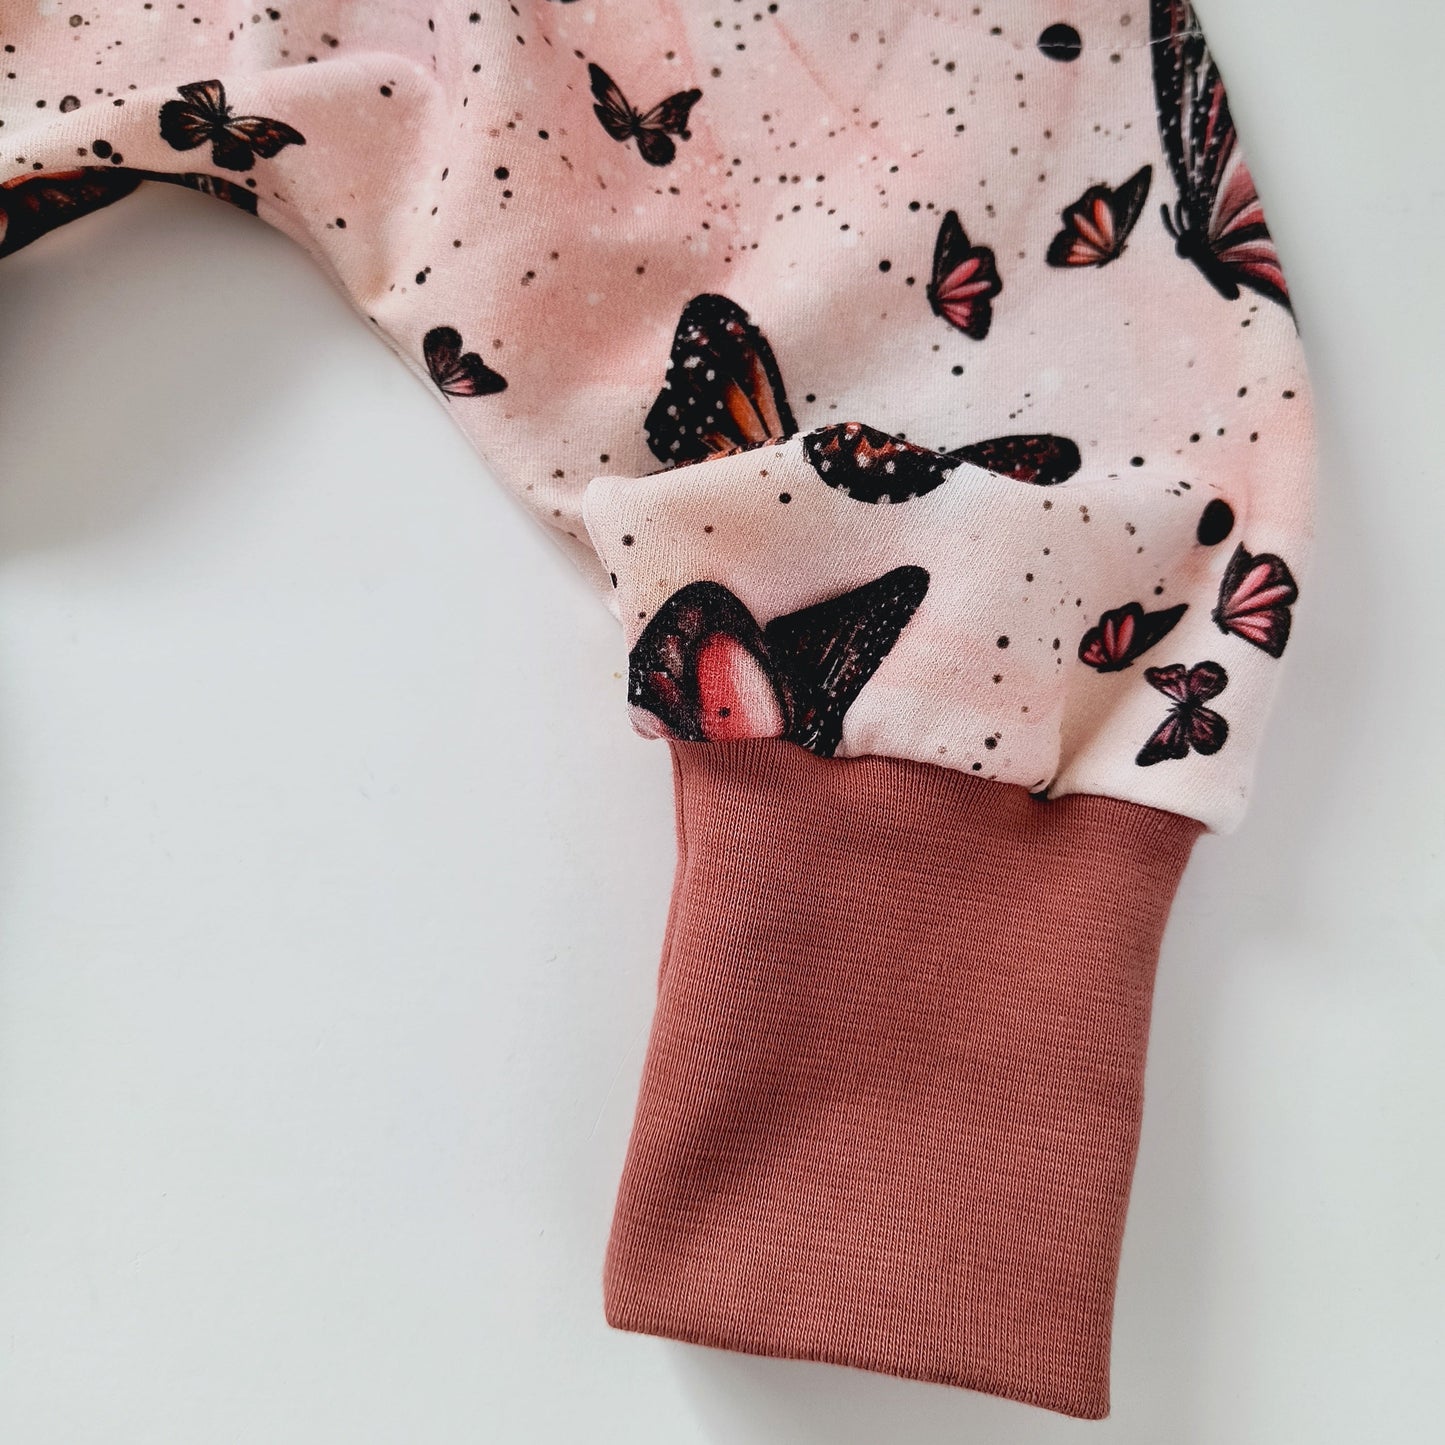 Baby sweat pants "grow with me", size EUR 80-86 cm/US 12-18 months, peachy butterflies (Handmade in Canada)